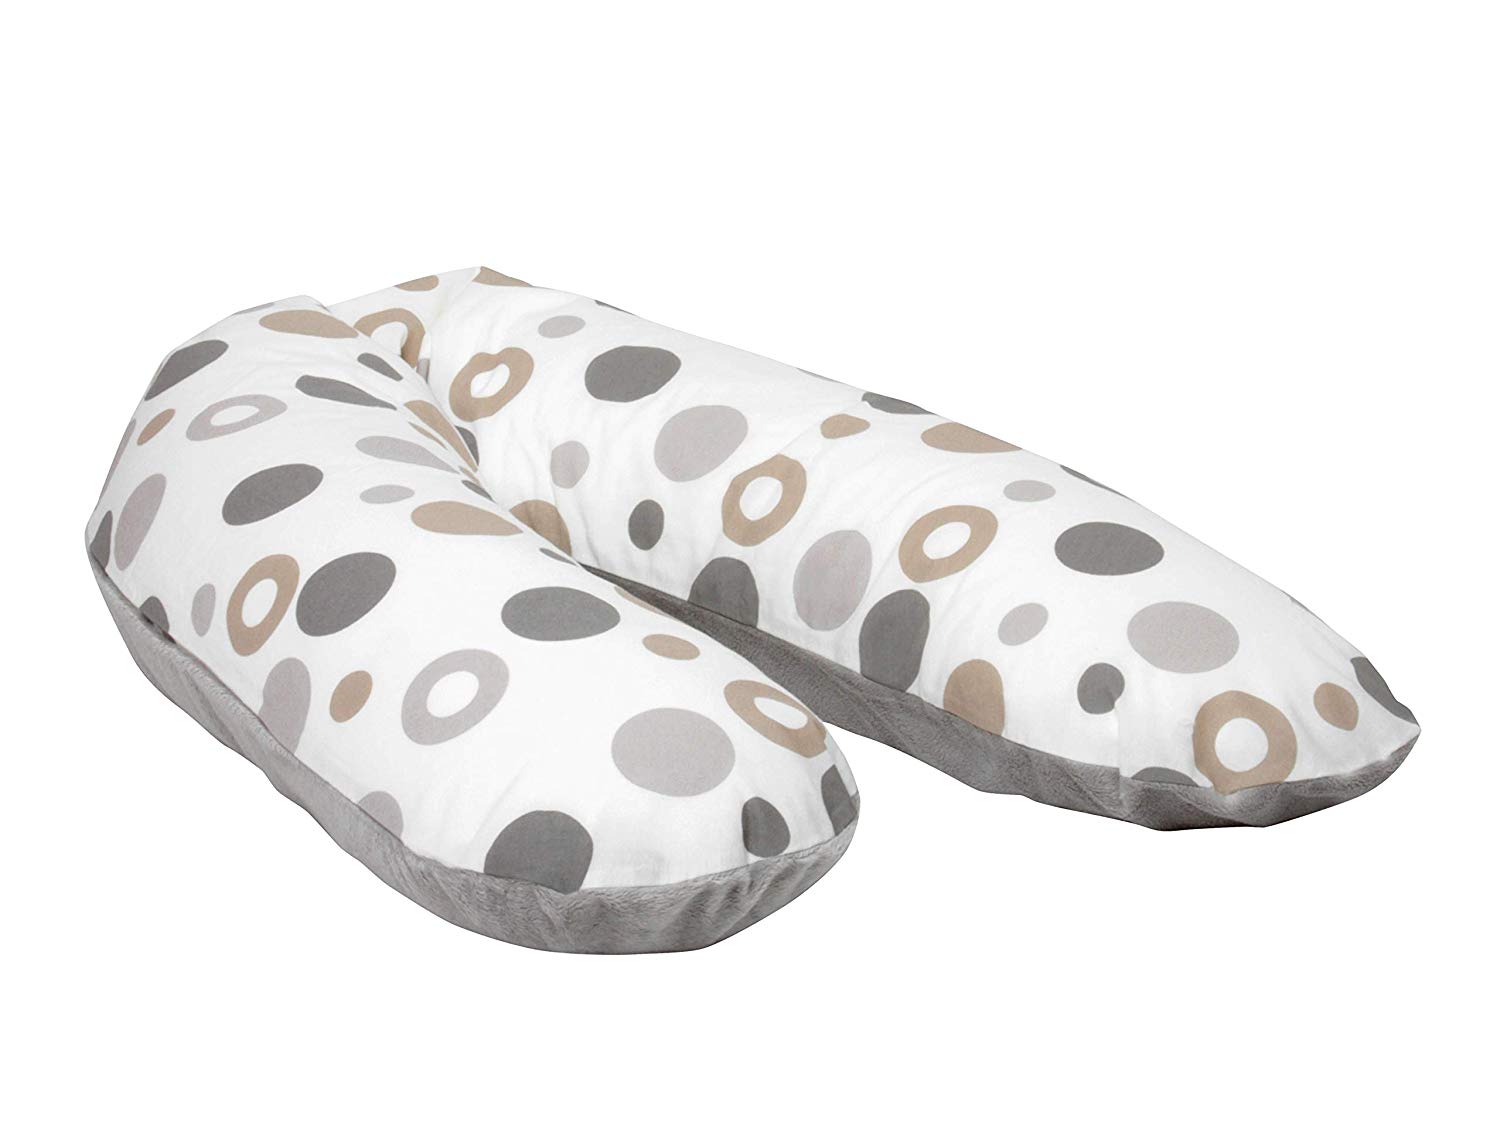 Snoozzz Nursing Pillow Positioning Pillow Side Sleeper Pillow 185 cm Includes Cotton and Microfibre Cover - Filling: Quiet and Fine Micro Beads - Circles Grey